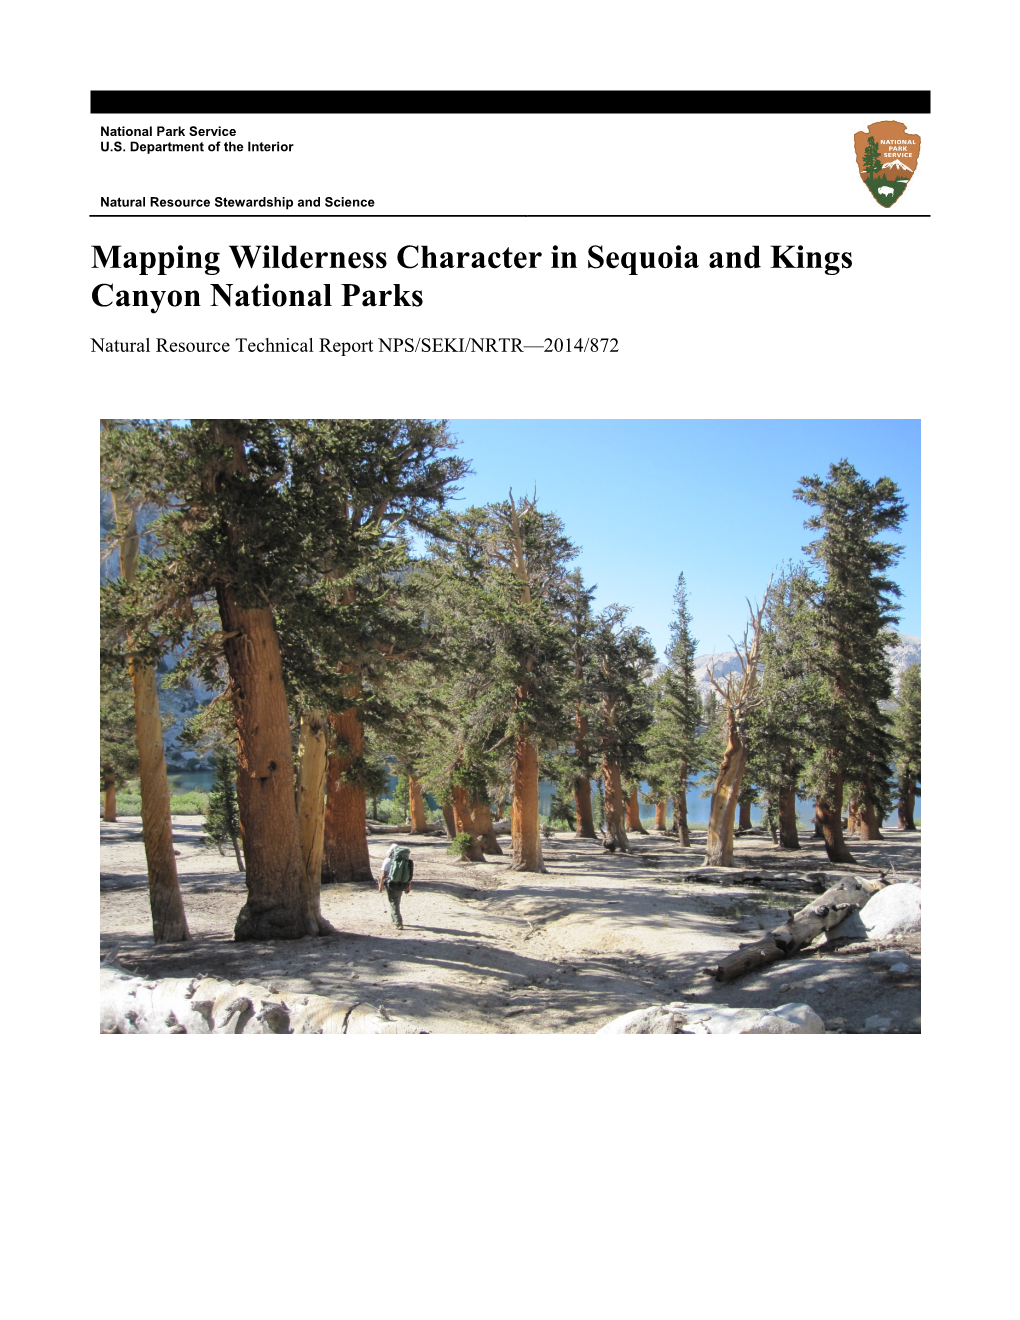 Mapping Wilderness Character in Sequoia and Kings Canyon National Parks